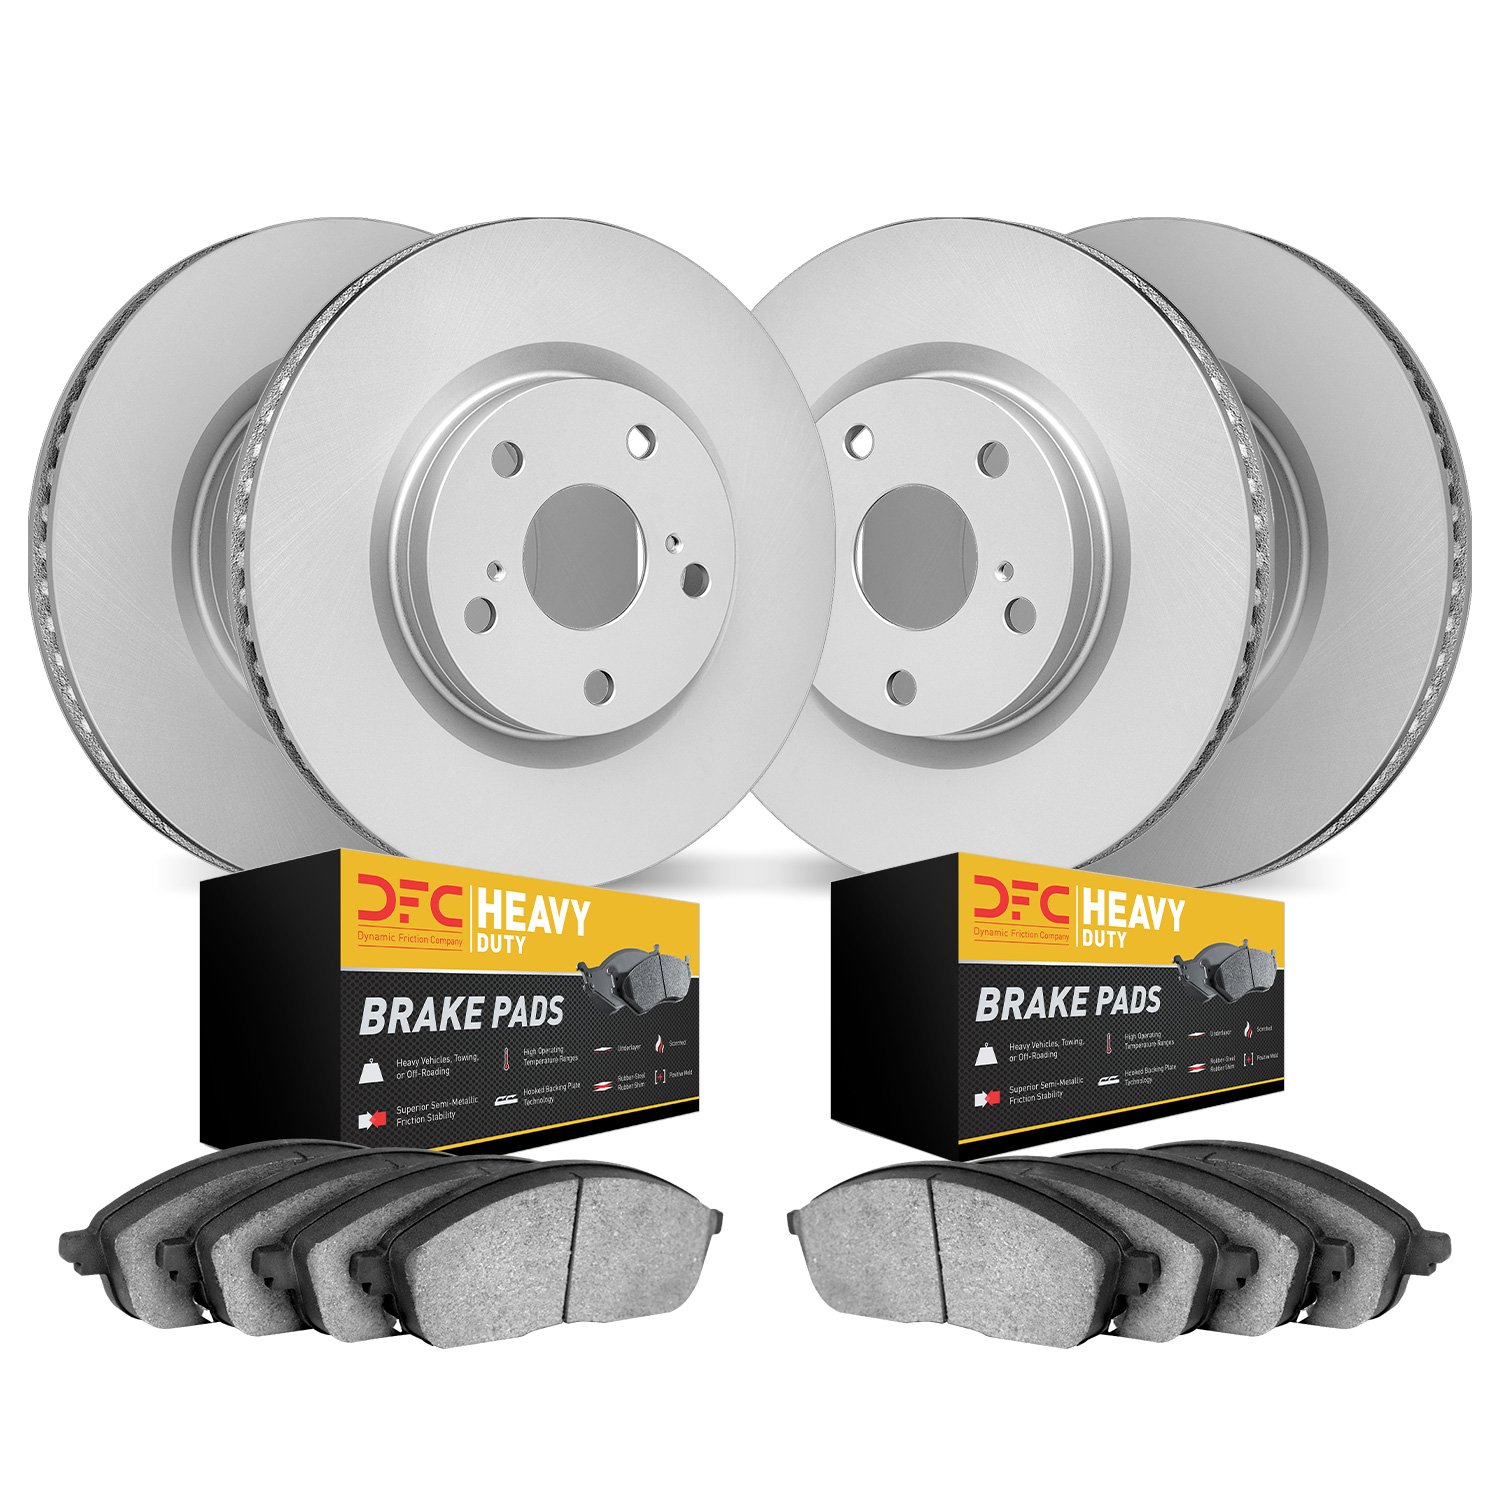 4204-55004 Geospec Brake Rotors w/Heavy-Duty Brake Pads Kit, 2003-2011 Ford/Lincoln/Mercury/Mazda, Position: Front and Rear